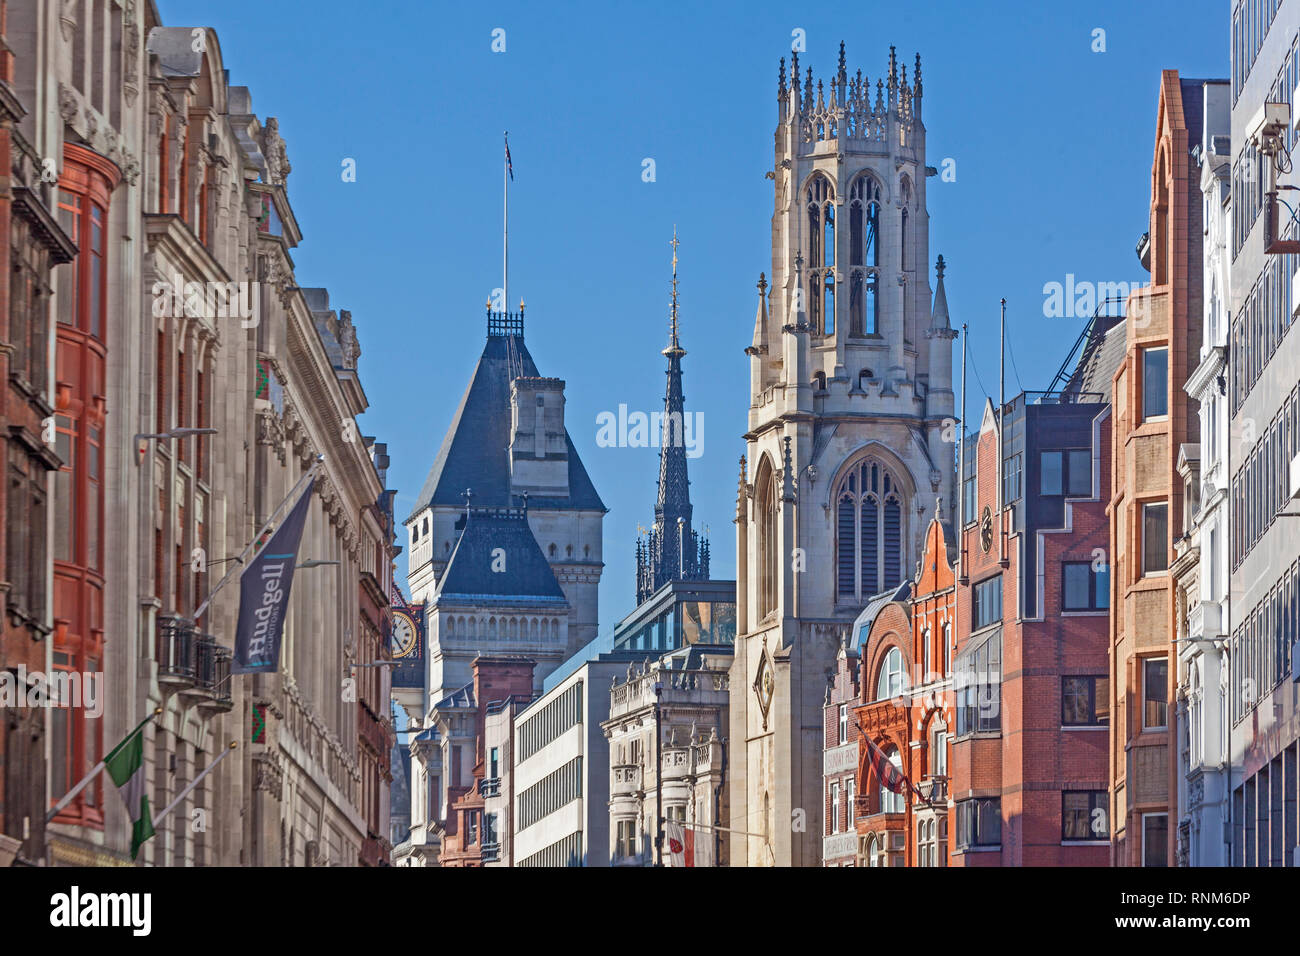 City of London. A view of Fleet Street looking towards the Strand, with the octagonal Perpendicular-style tower of St Dunstan-in-the-West prominent. Stock Photo